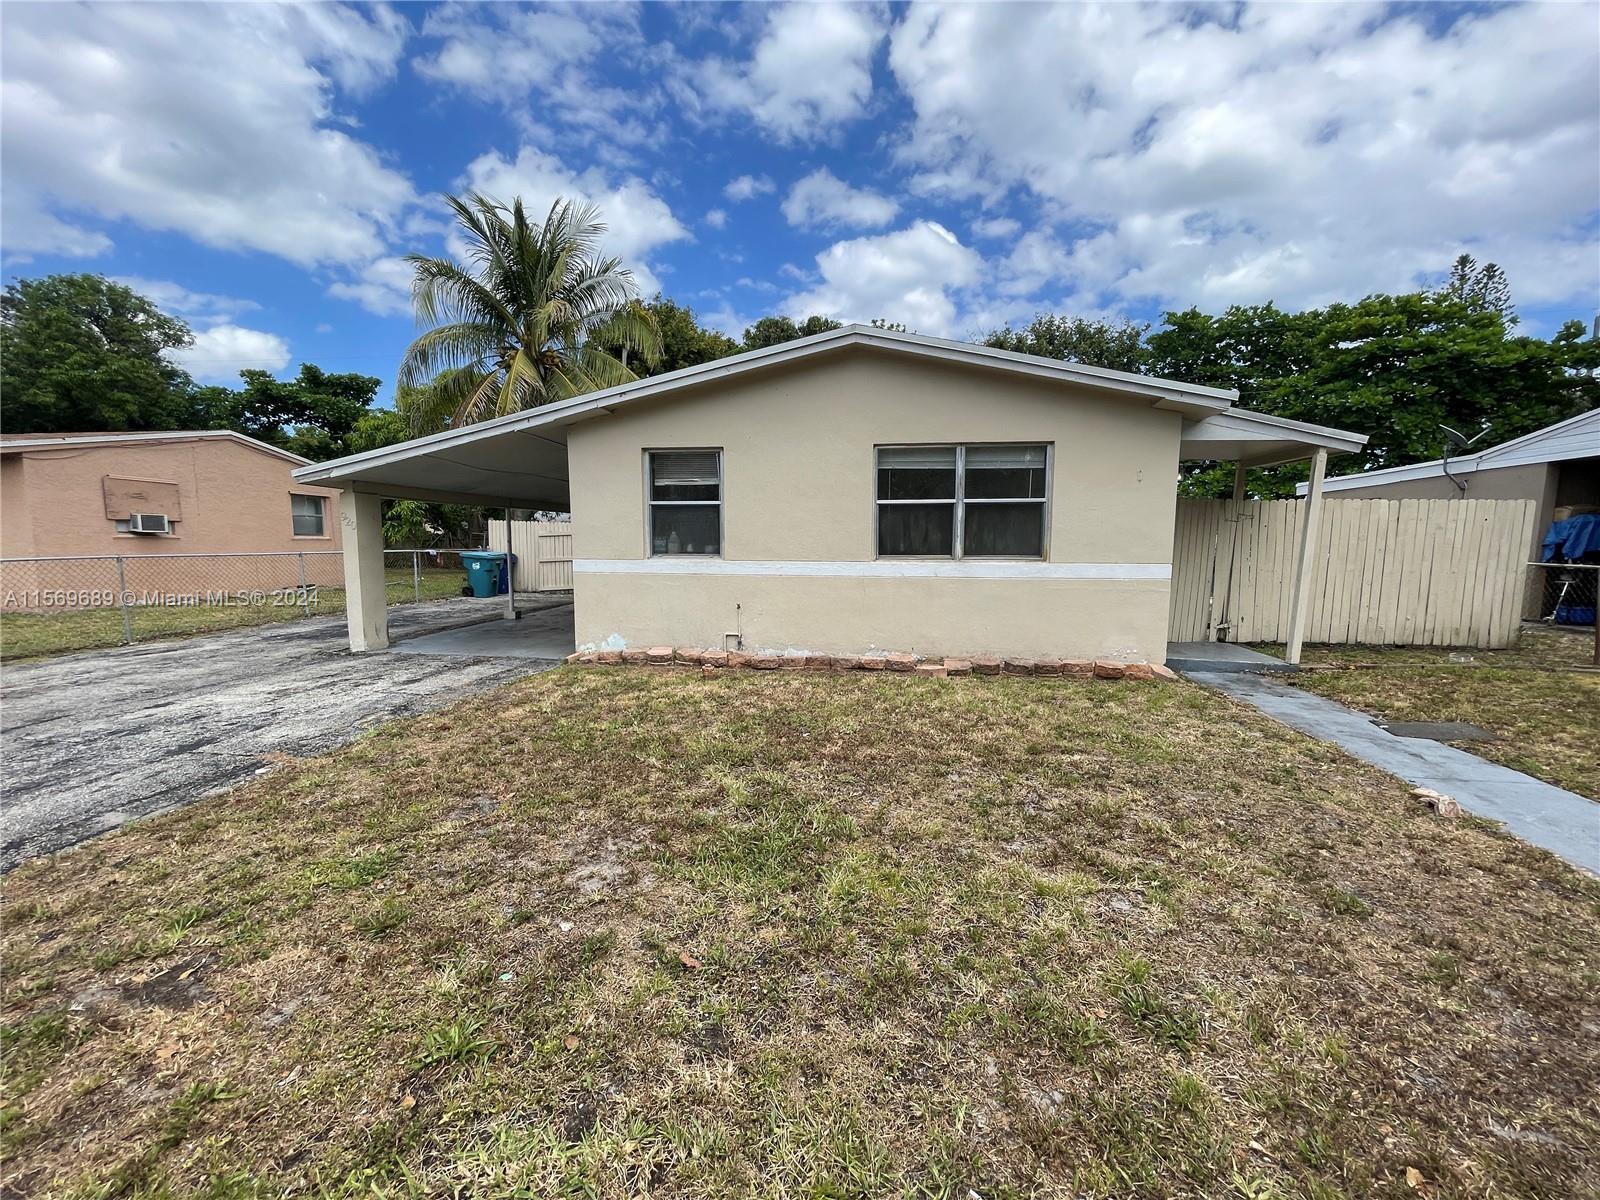 Photo of 920 NW 34th Wy in Lauderhill, FL